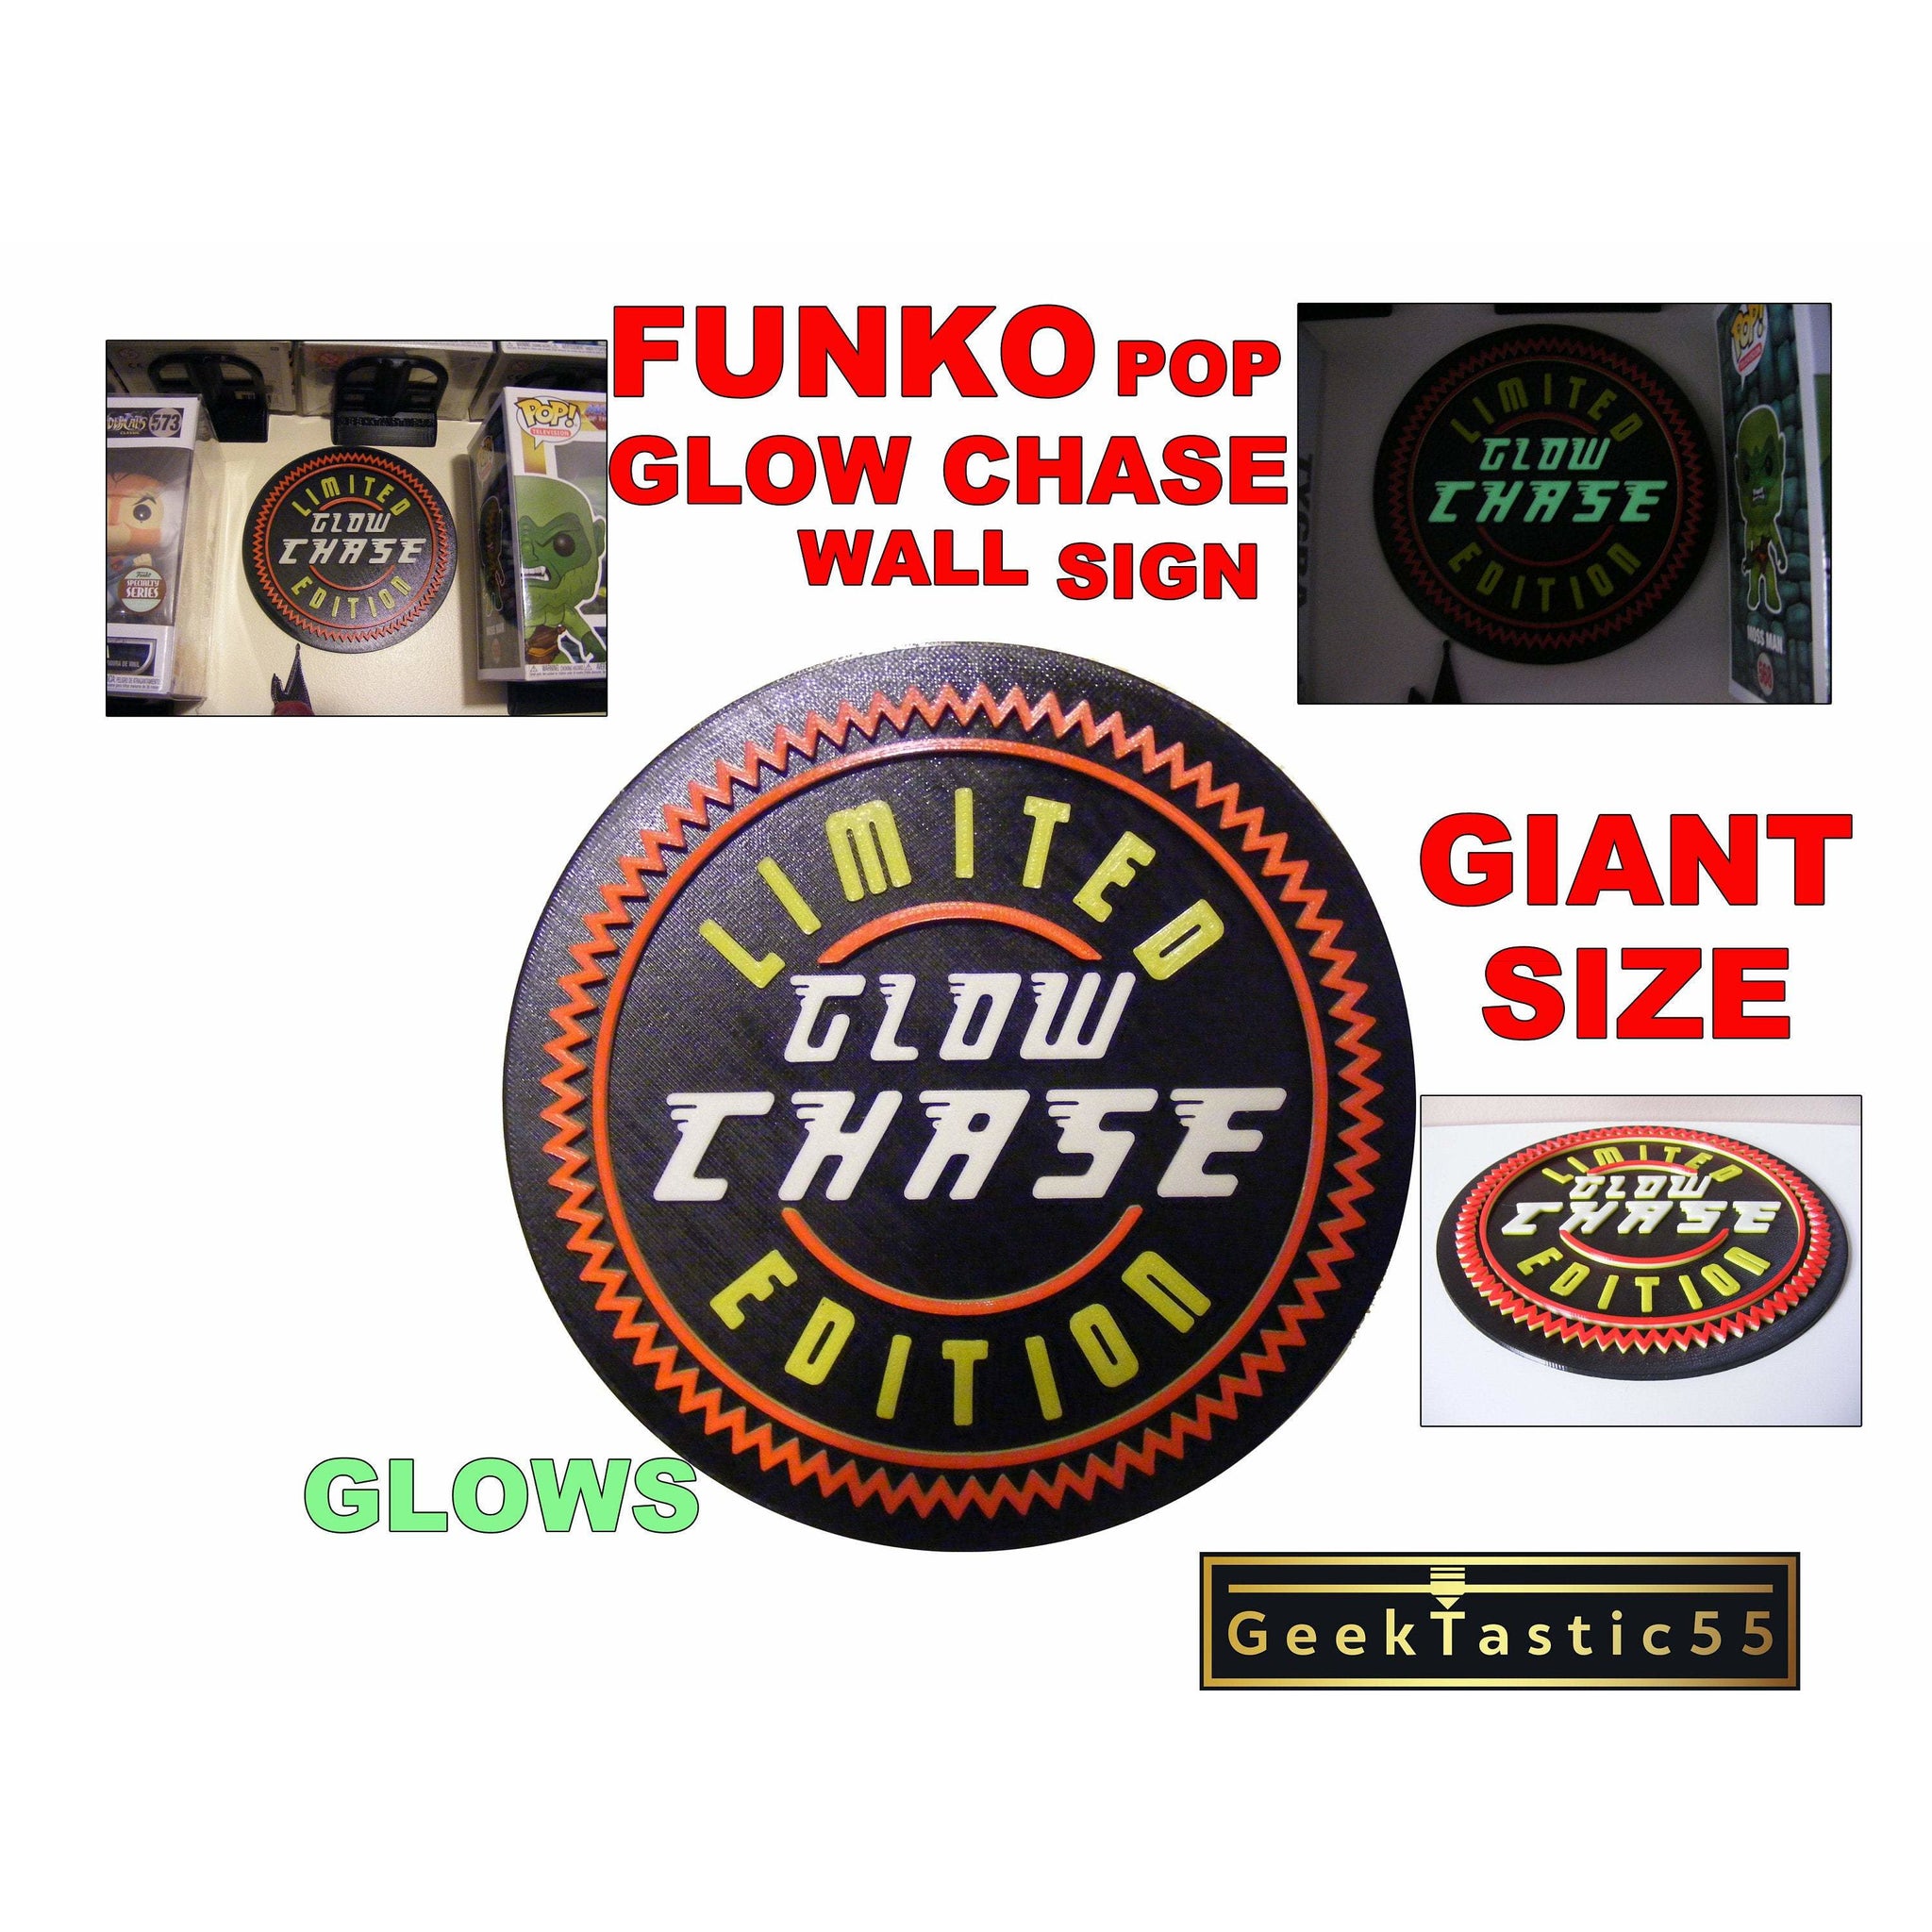 Funko Pop Glow Chase wall sign. Chase funko custom stand. stick to